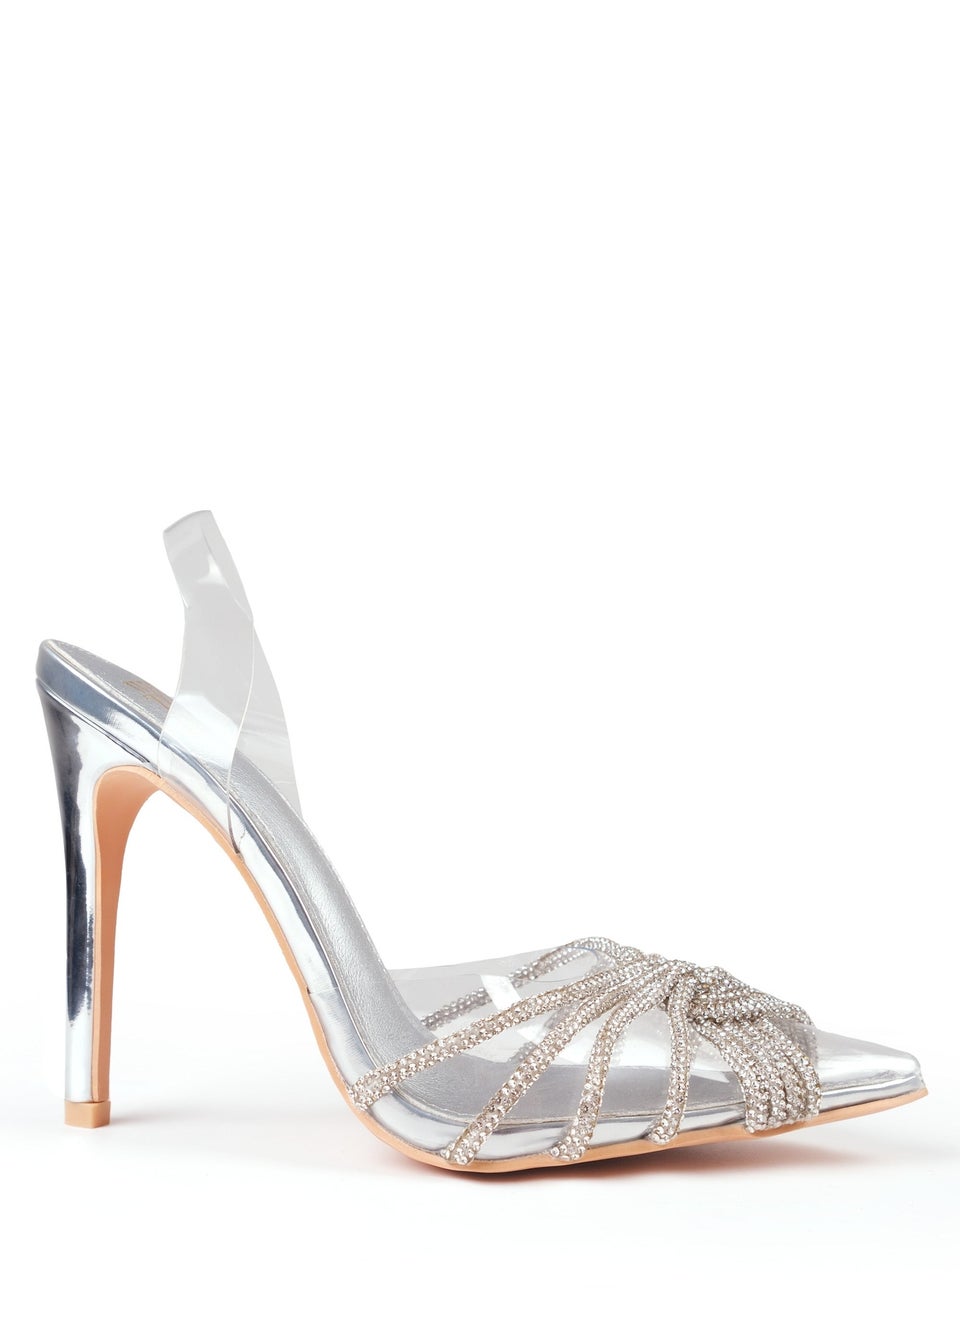 Where's That From Silver Vanna Perspex Pointed Toe High Heels